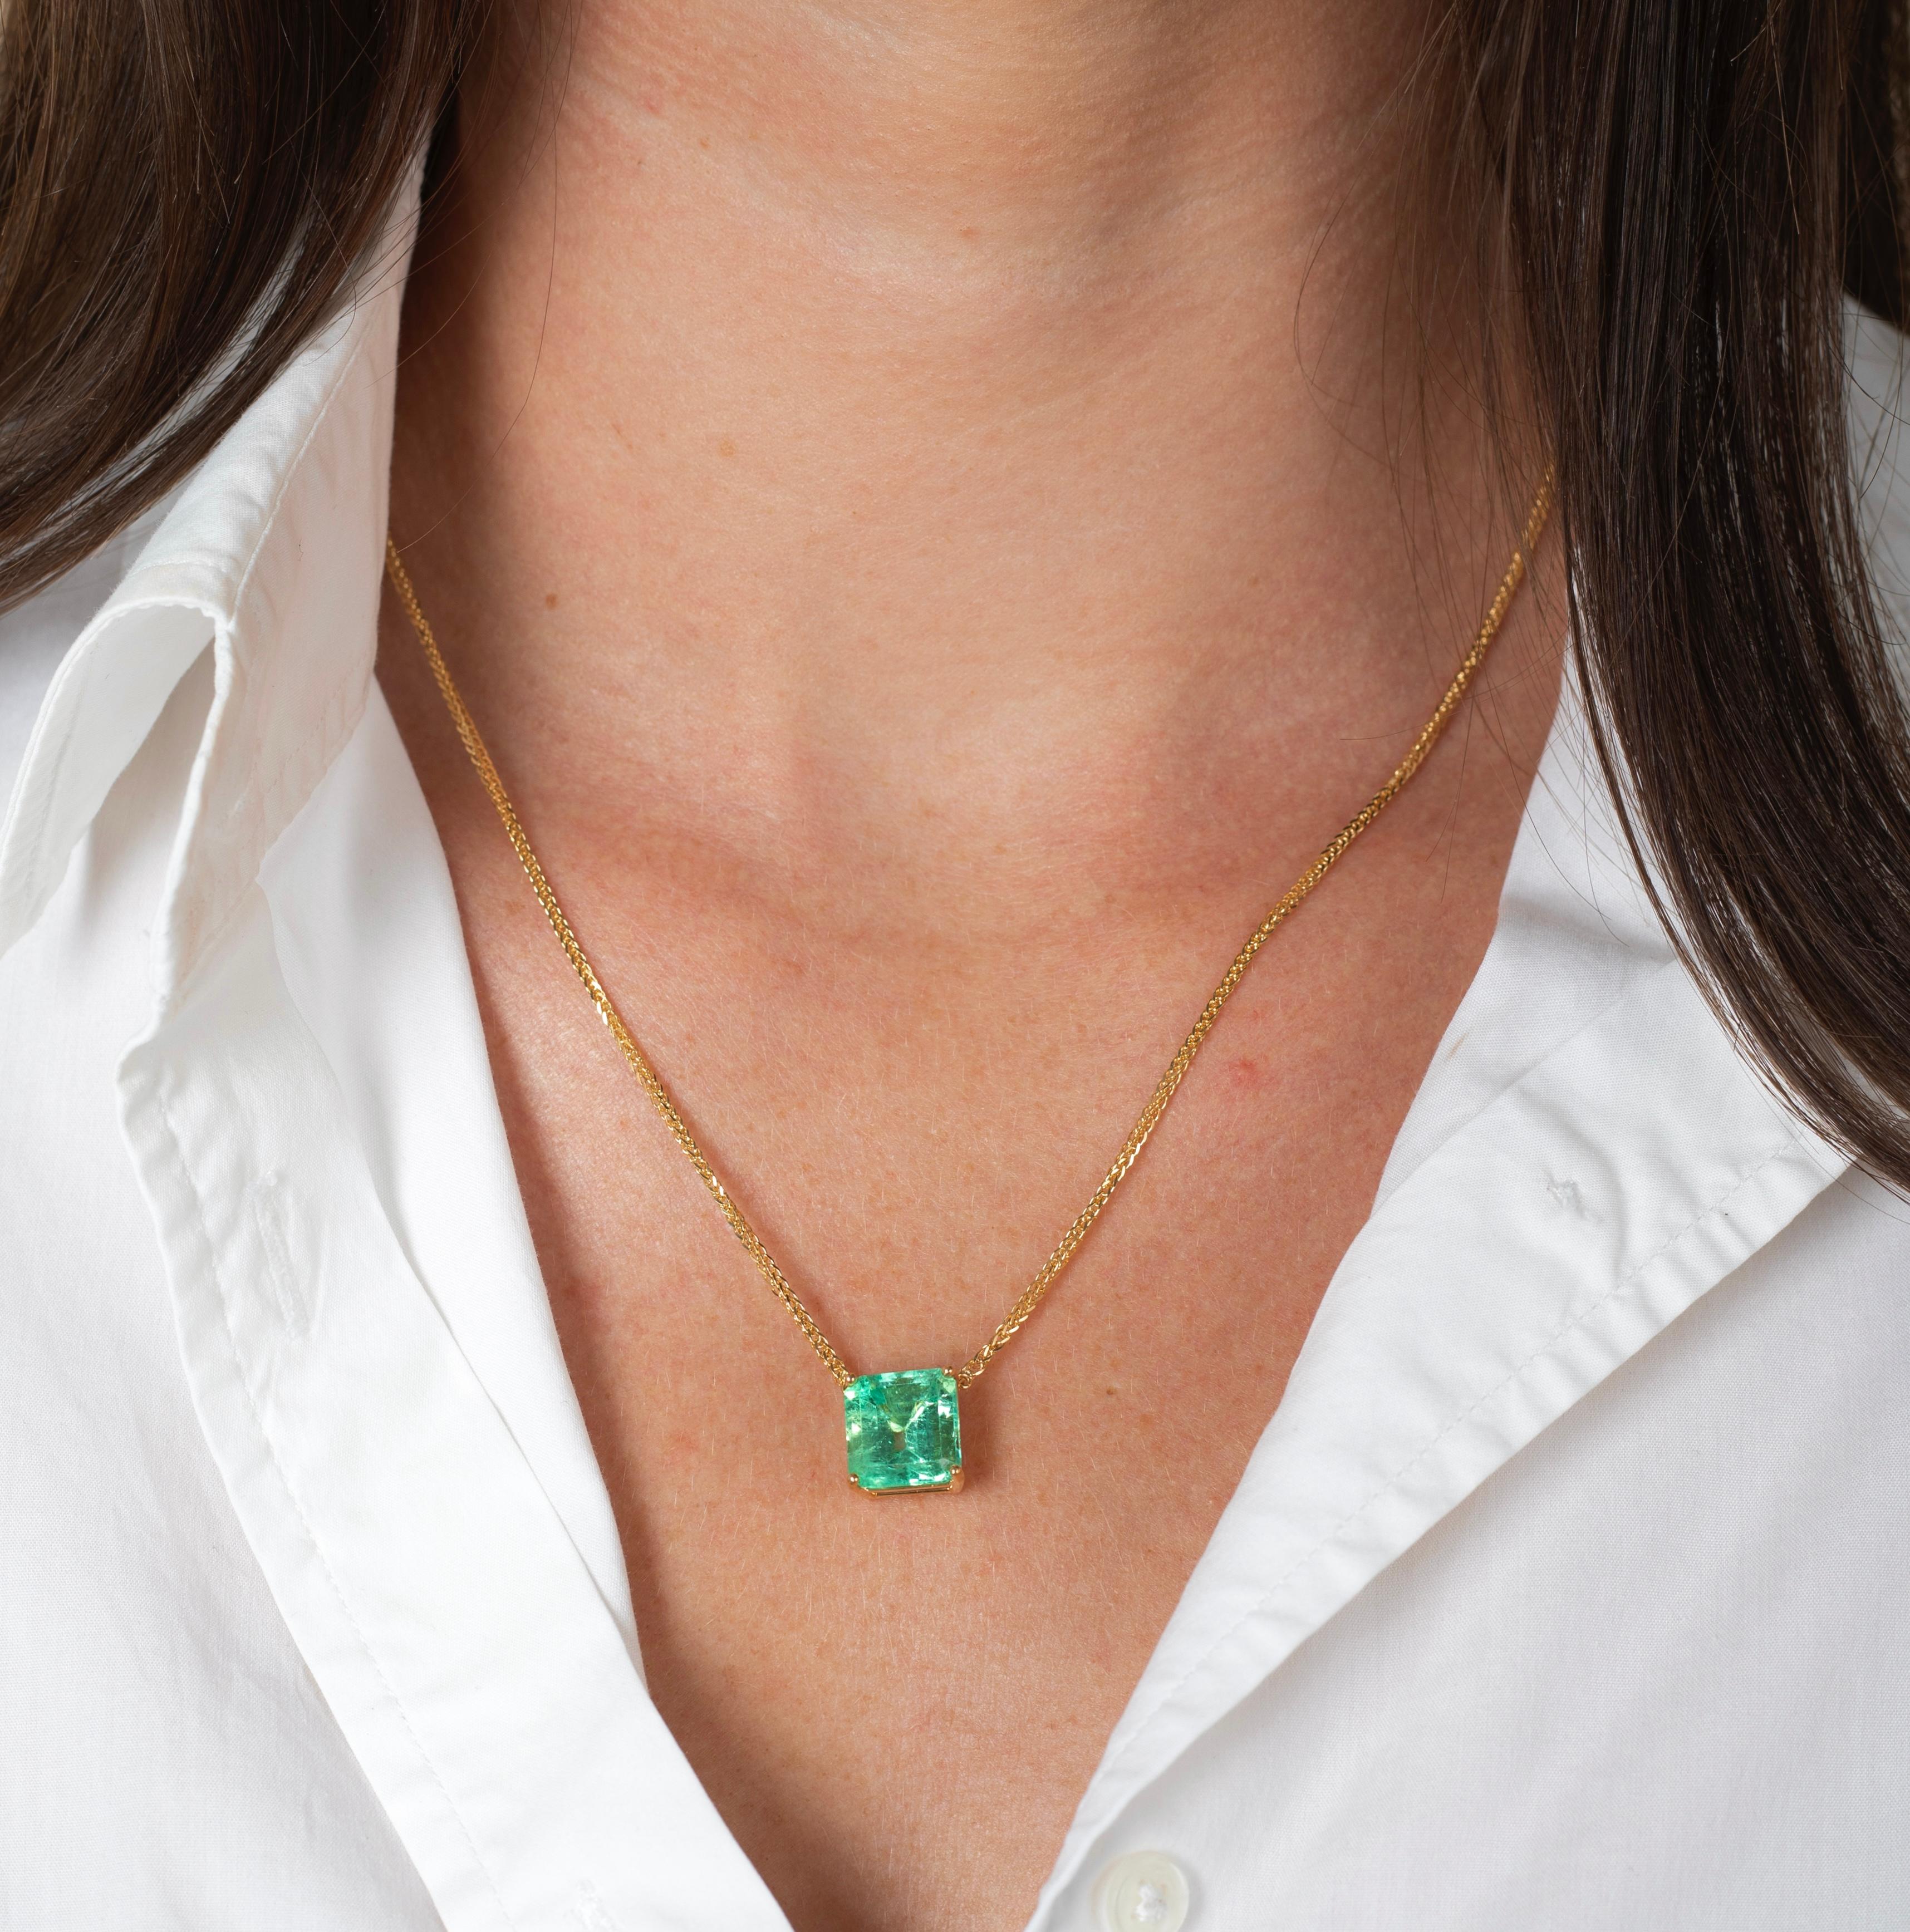 5.83-carat natural emerald solitaire floating pendant necklace. Seamlessly stationed on an 18k gold wheat chain with lobster clip closure. Yellow gold offers a gorgeous contrast to the vibrant pastel green color saturation of the center stone.

This